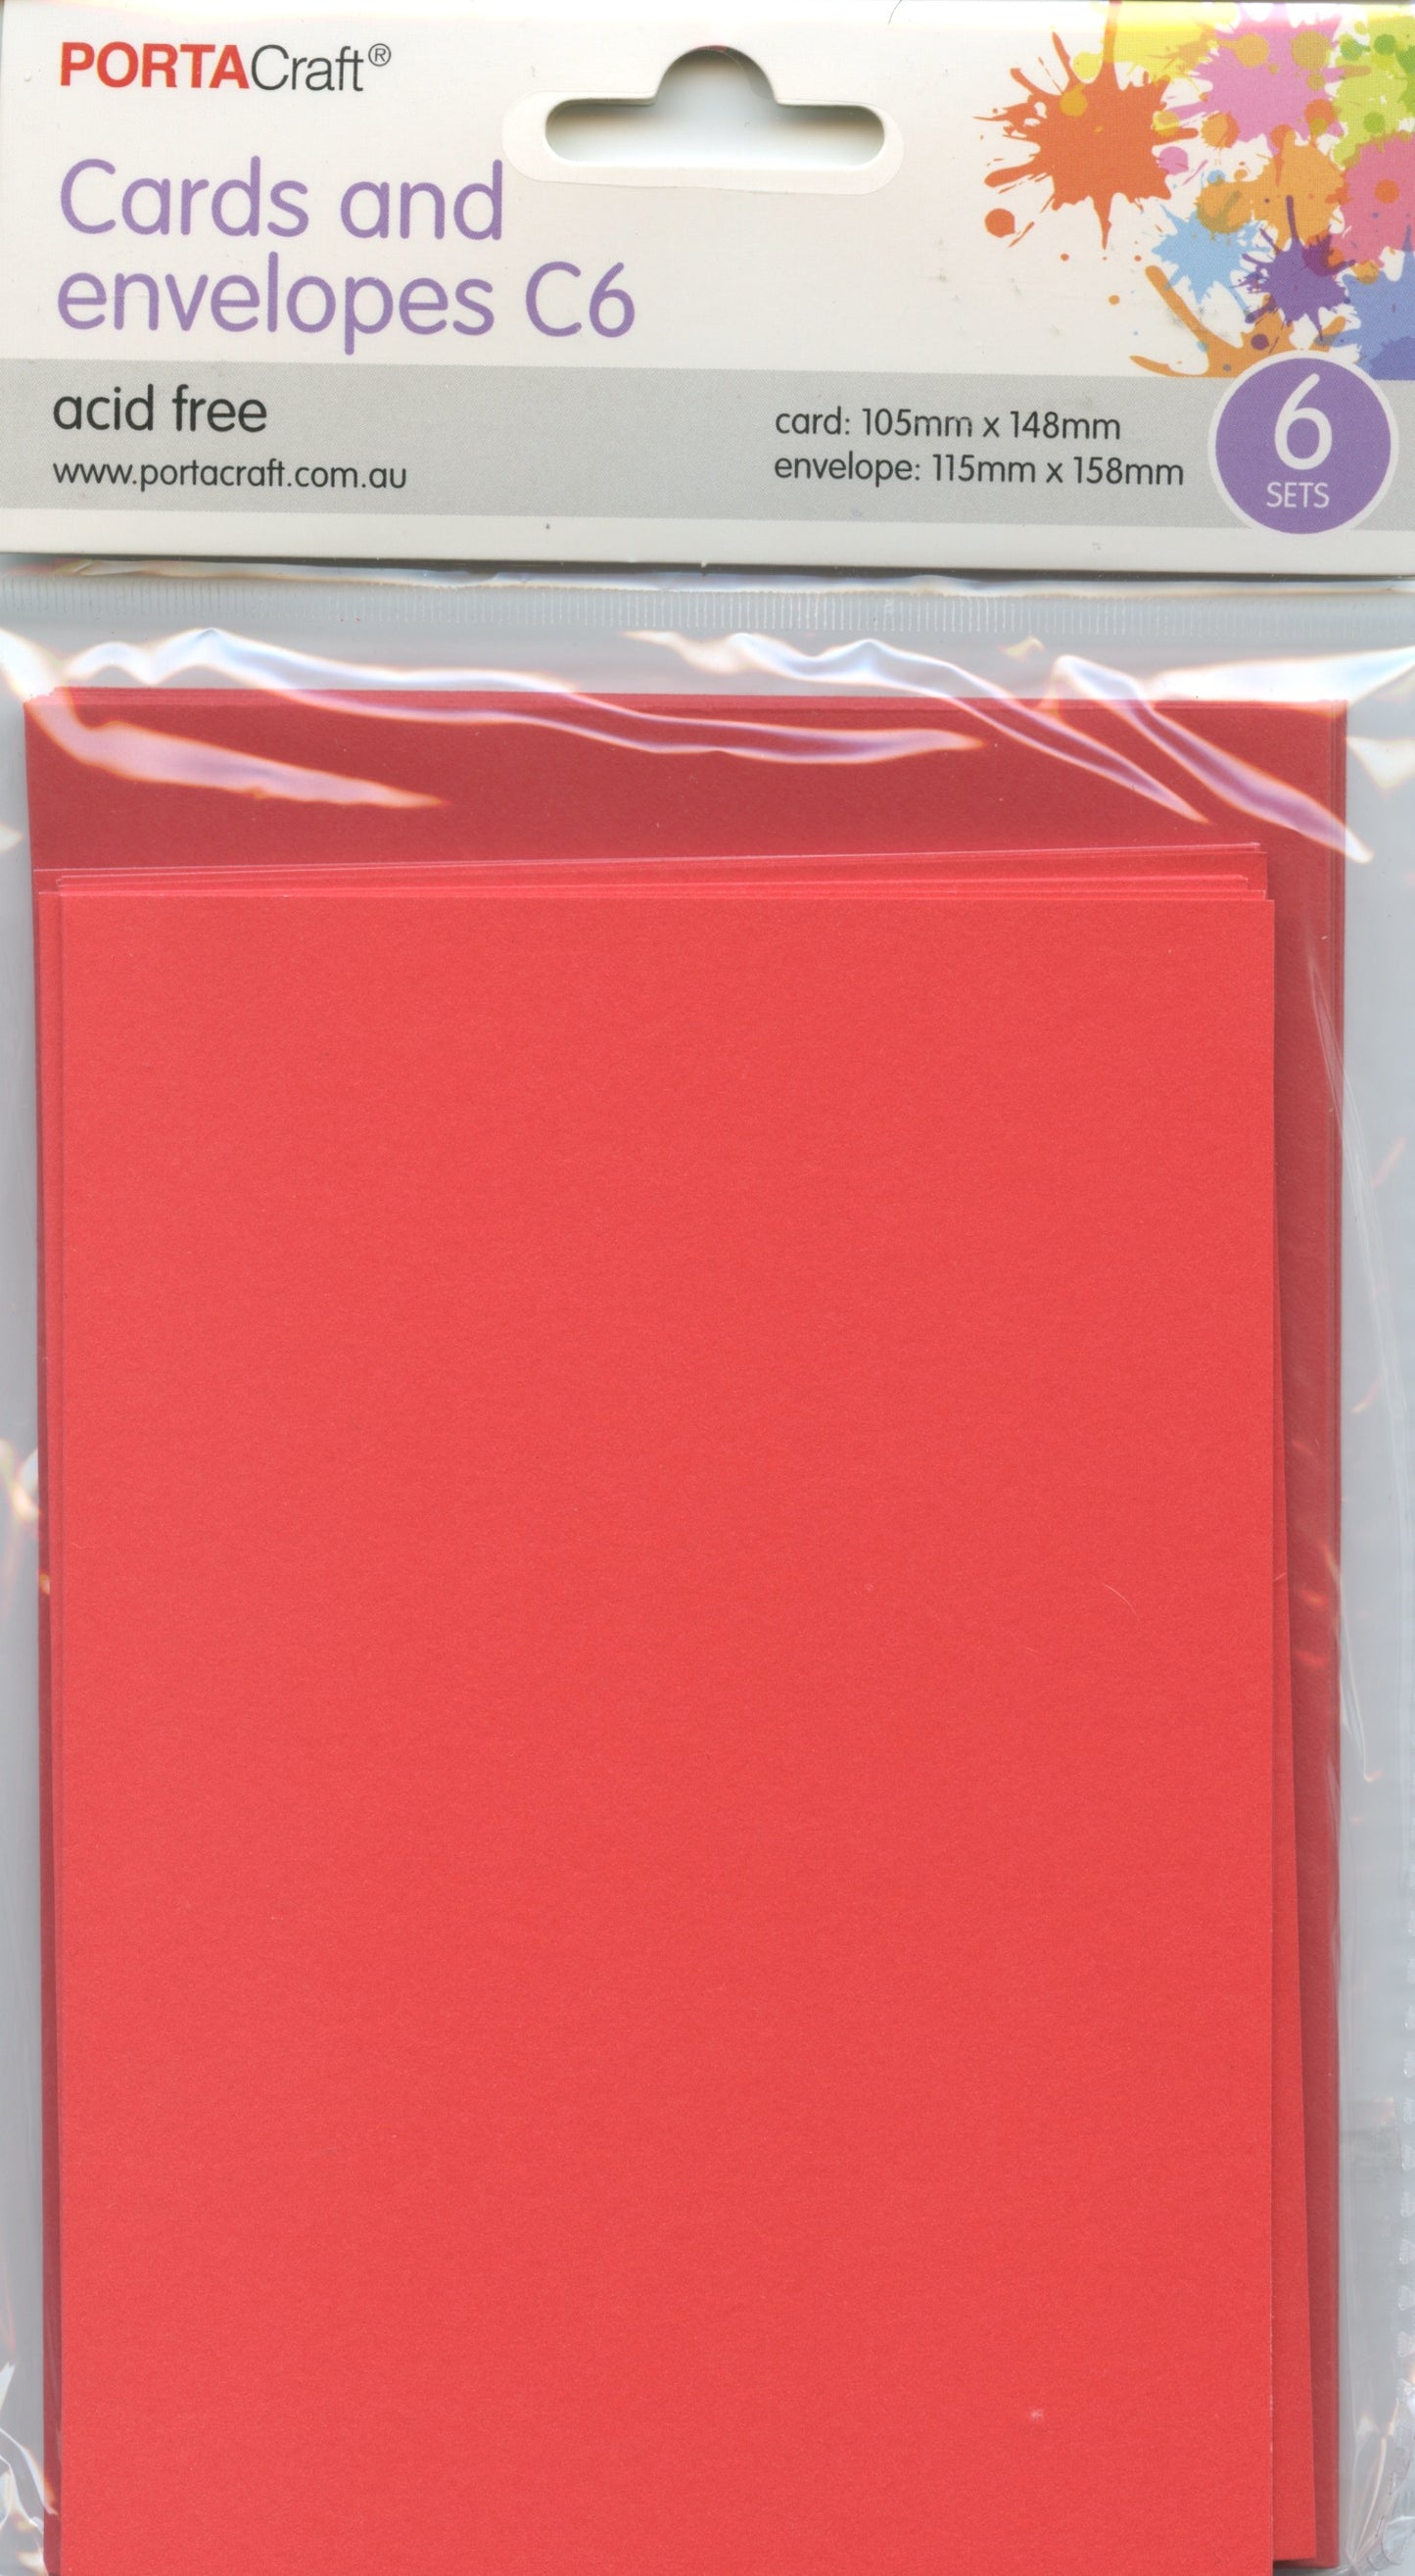 Porta Craft Cards and Envelopes C6 - 6 Sets - Red